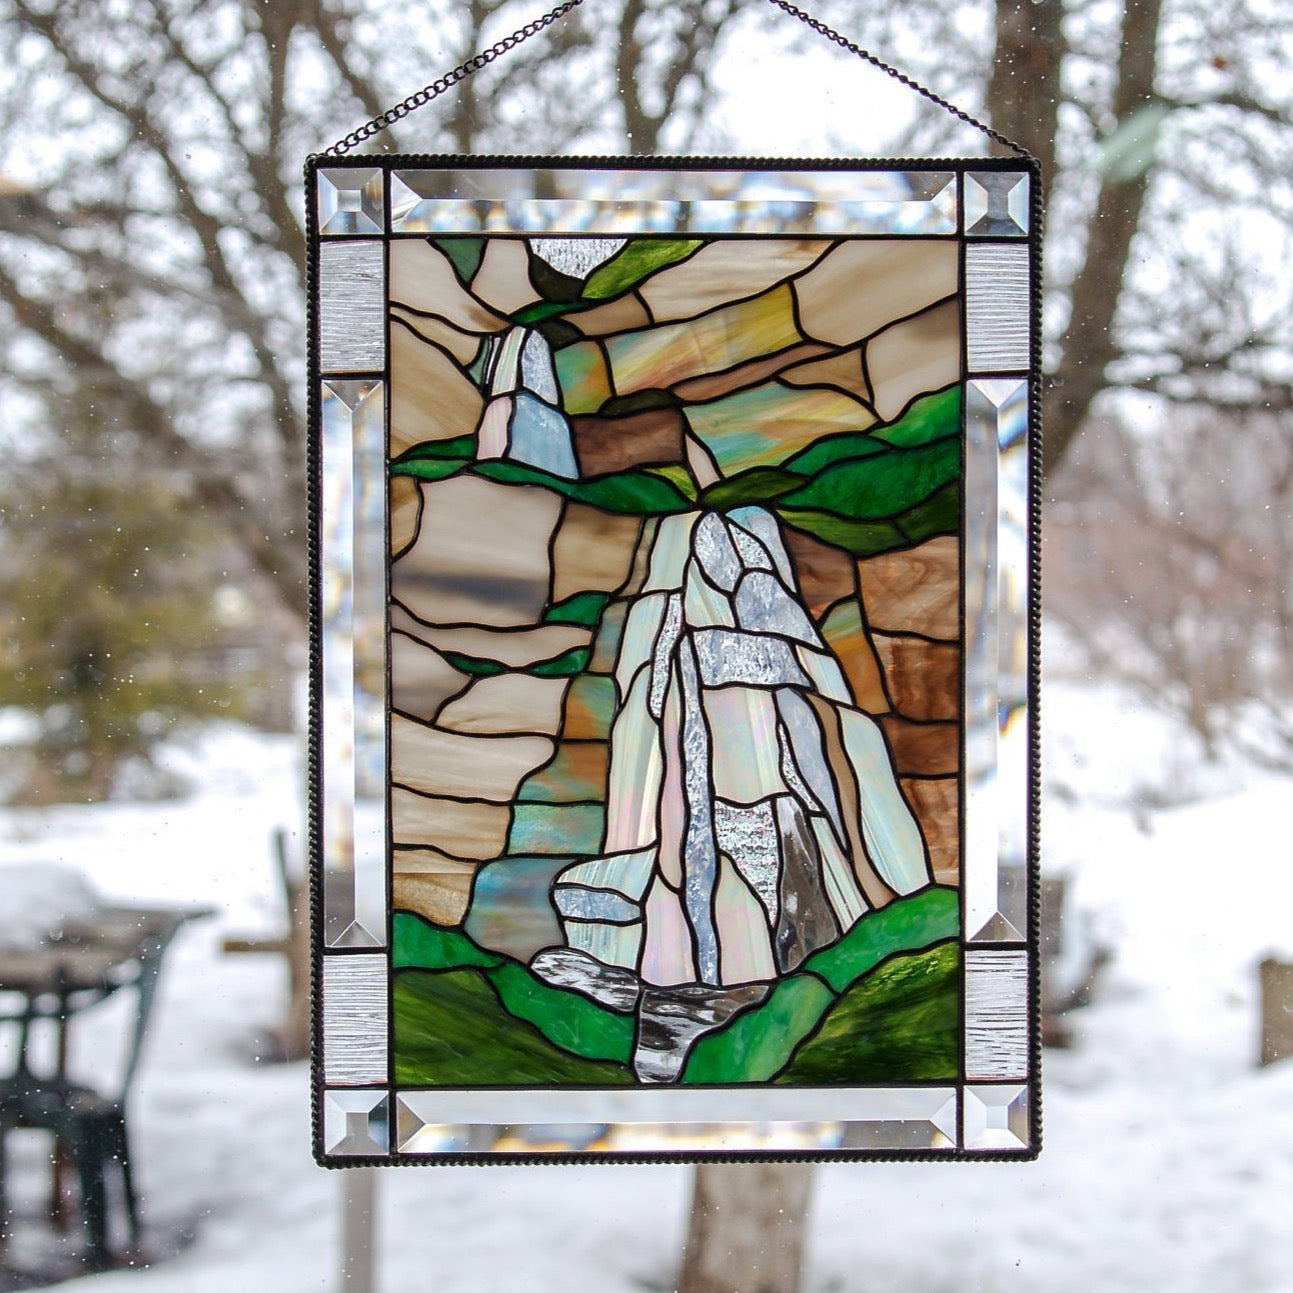 Stained glass panel depicting Bridal Veil Falls in Utah with its cliffs 